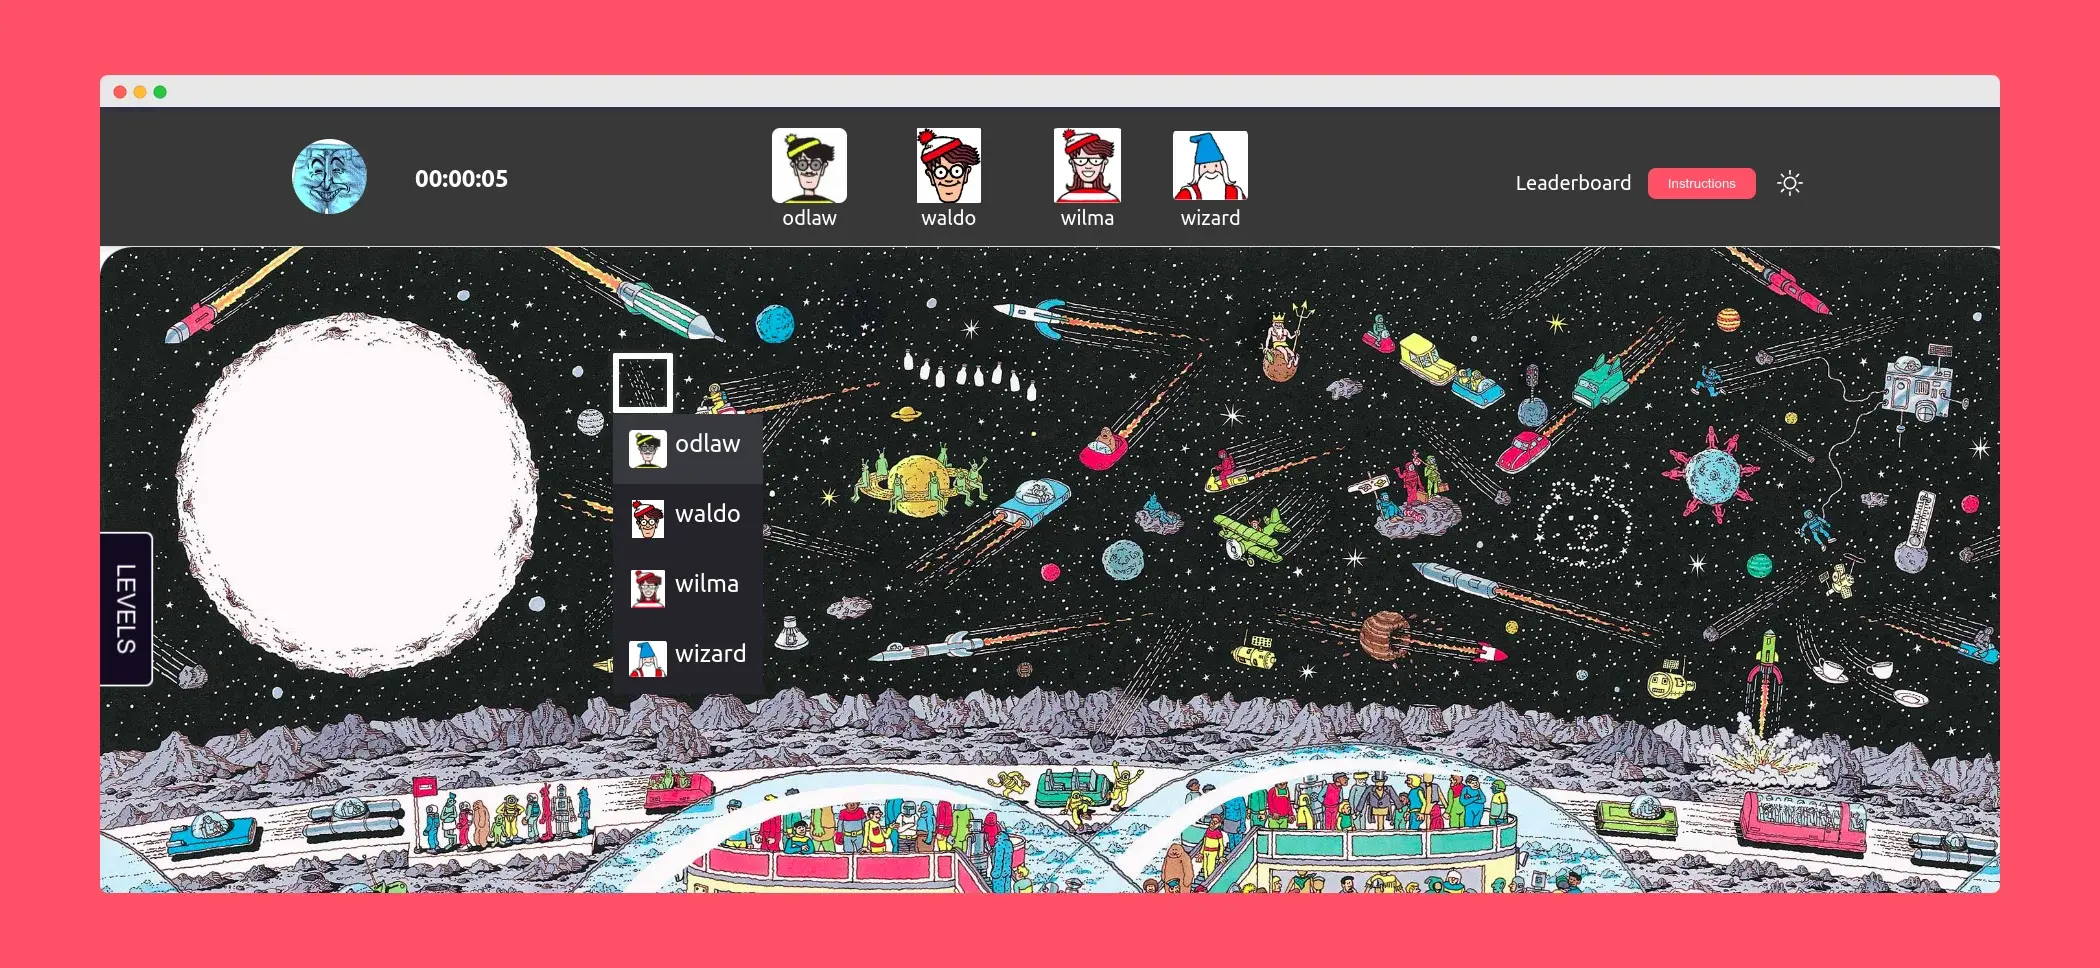 A zoomed-in vertical screenshot of the bottom portion of the mobile version of the 'Where's Waldo?' game. This section displays two level thumbnails: one depicts a festive scene with bright lights and the other, a space-themed scene with planets and spaceships. A purple 'LEVELS' button is seen on the right edge.